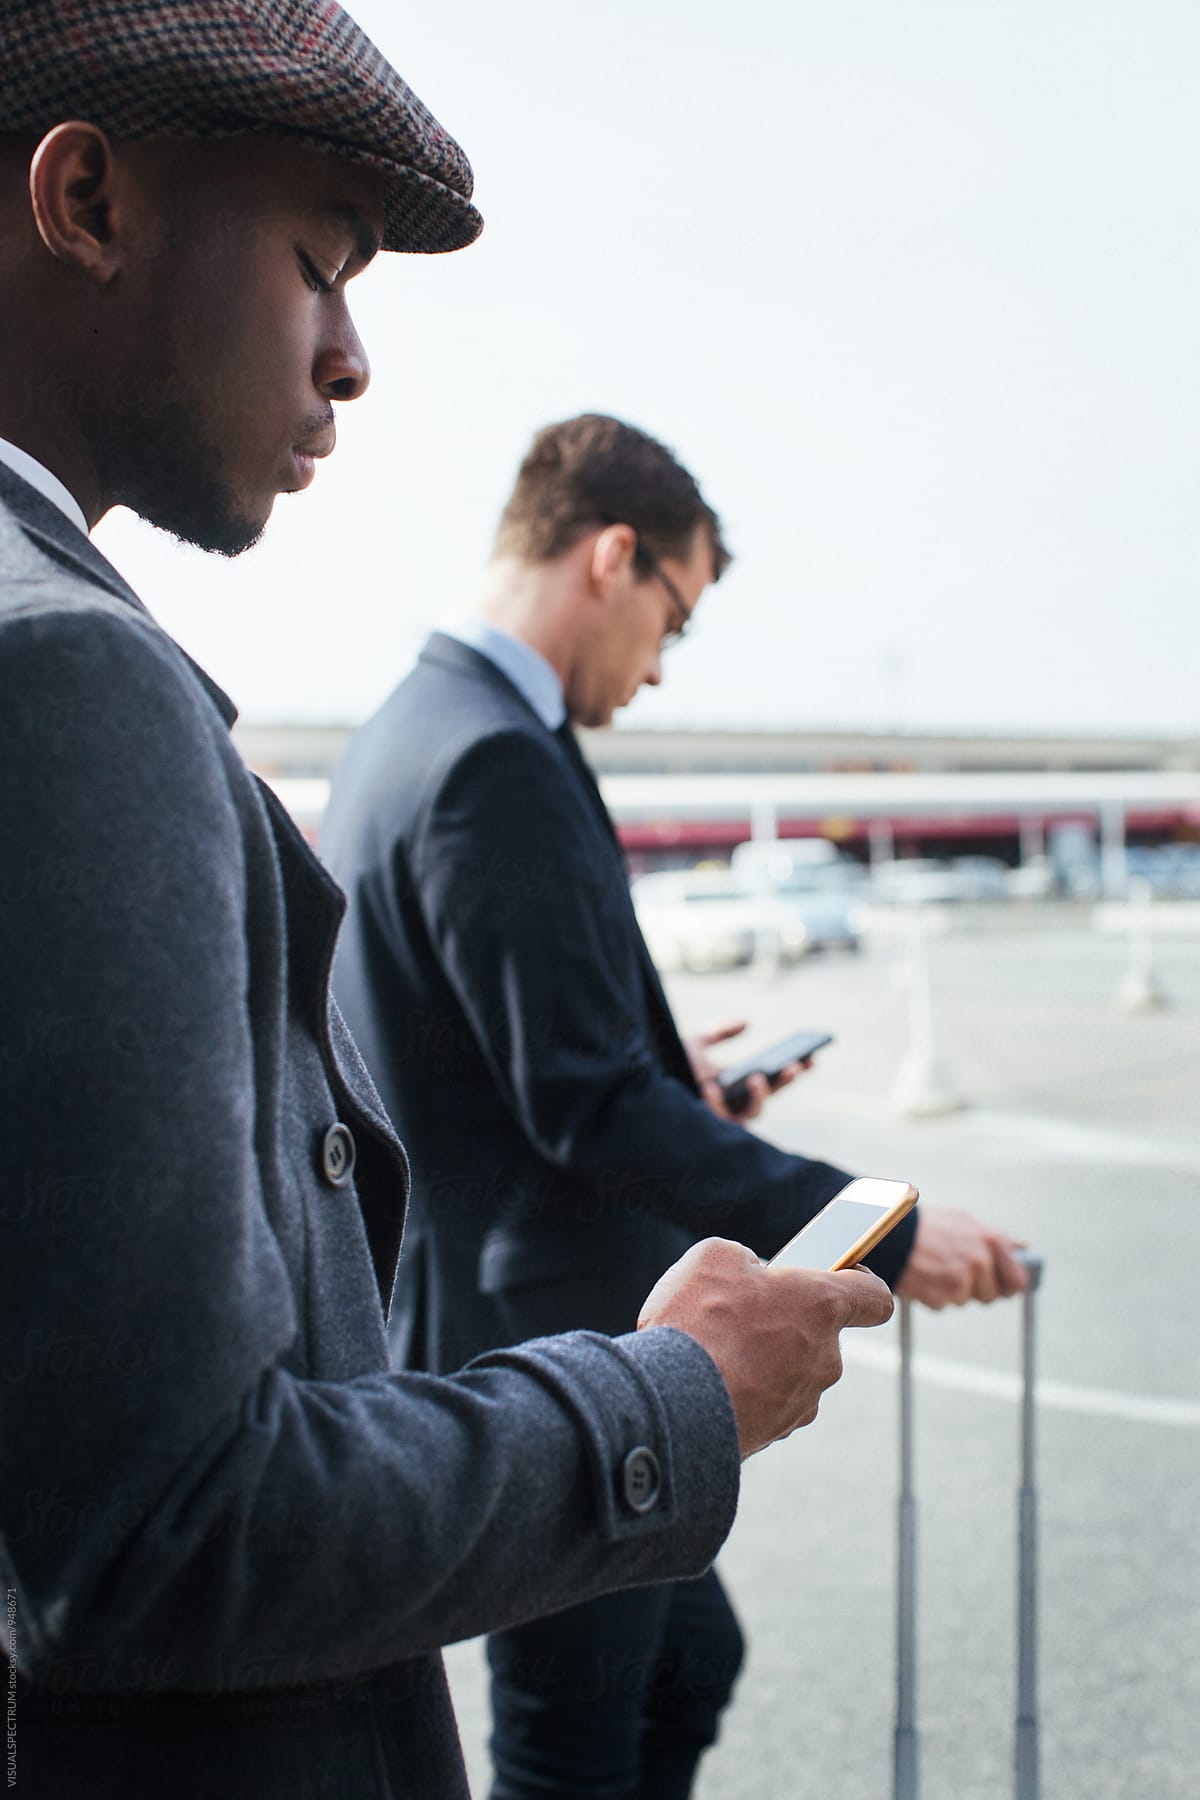 Black and Caucasian Business Travelers Using Smartphones as They Wait For Taxi